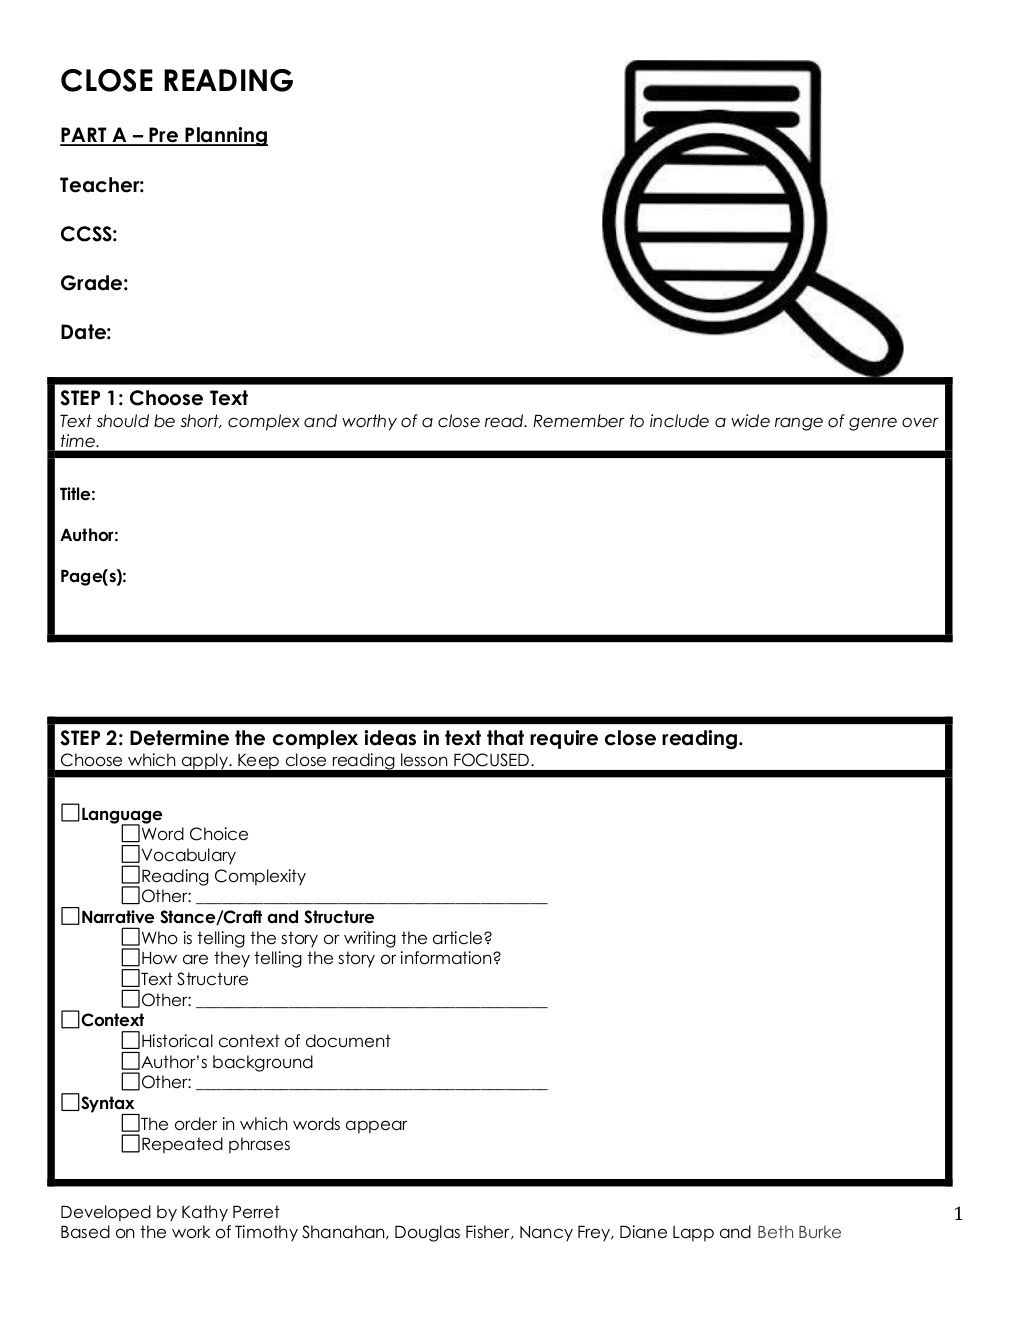 Free Close Reading Planning Template (.docx): Must Create A